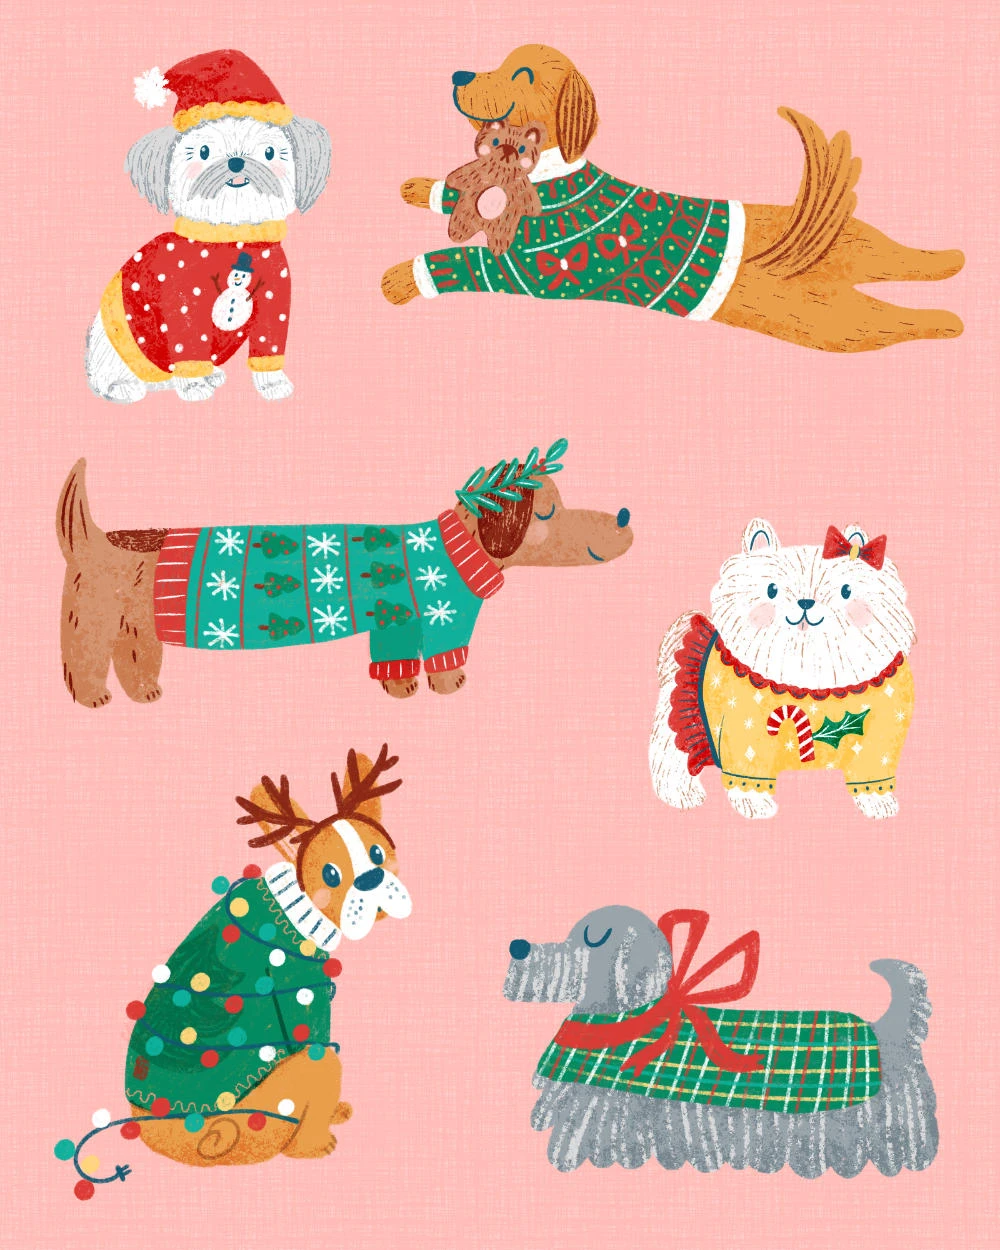 Original illustration of cute dogs in Christmas sweaters